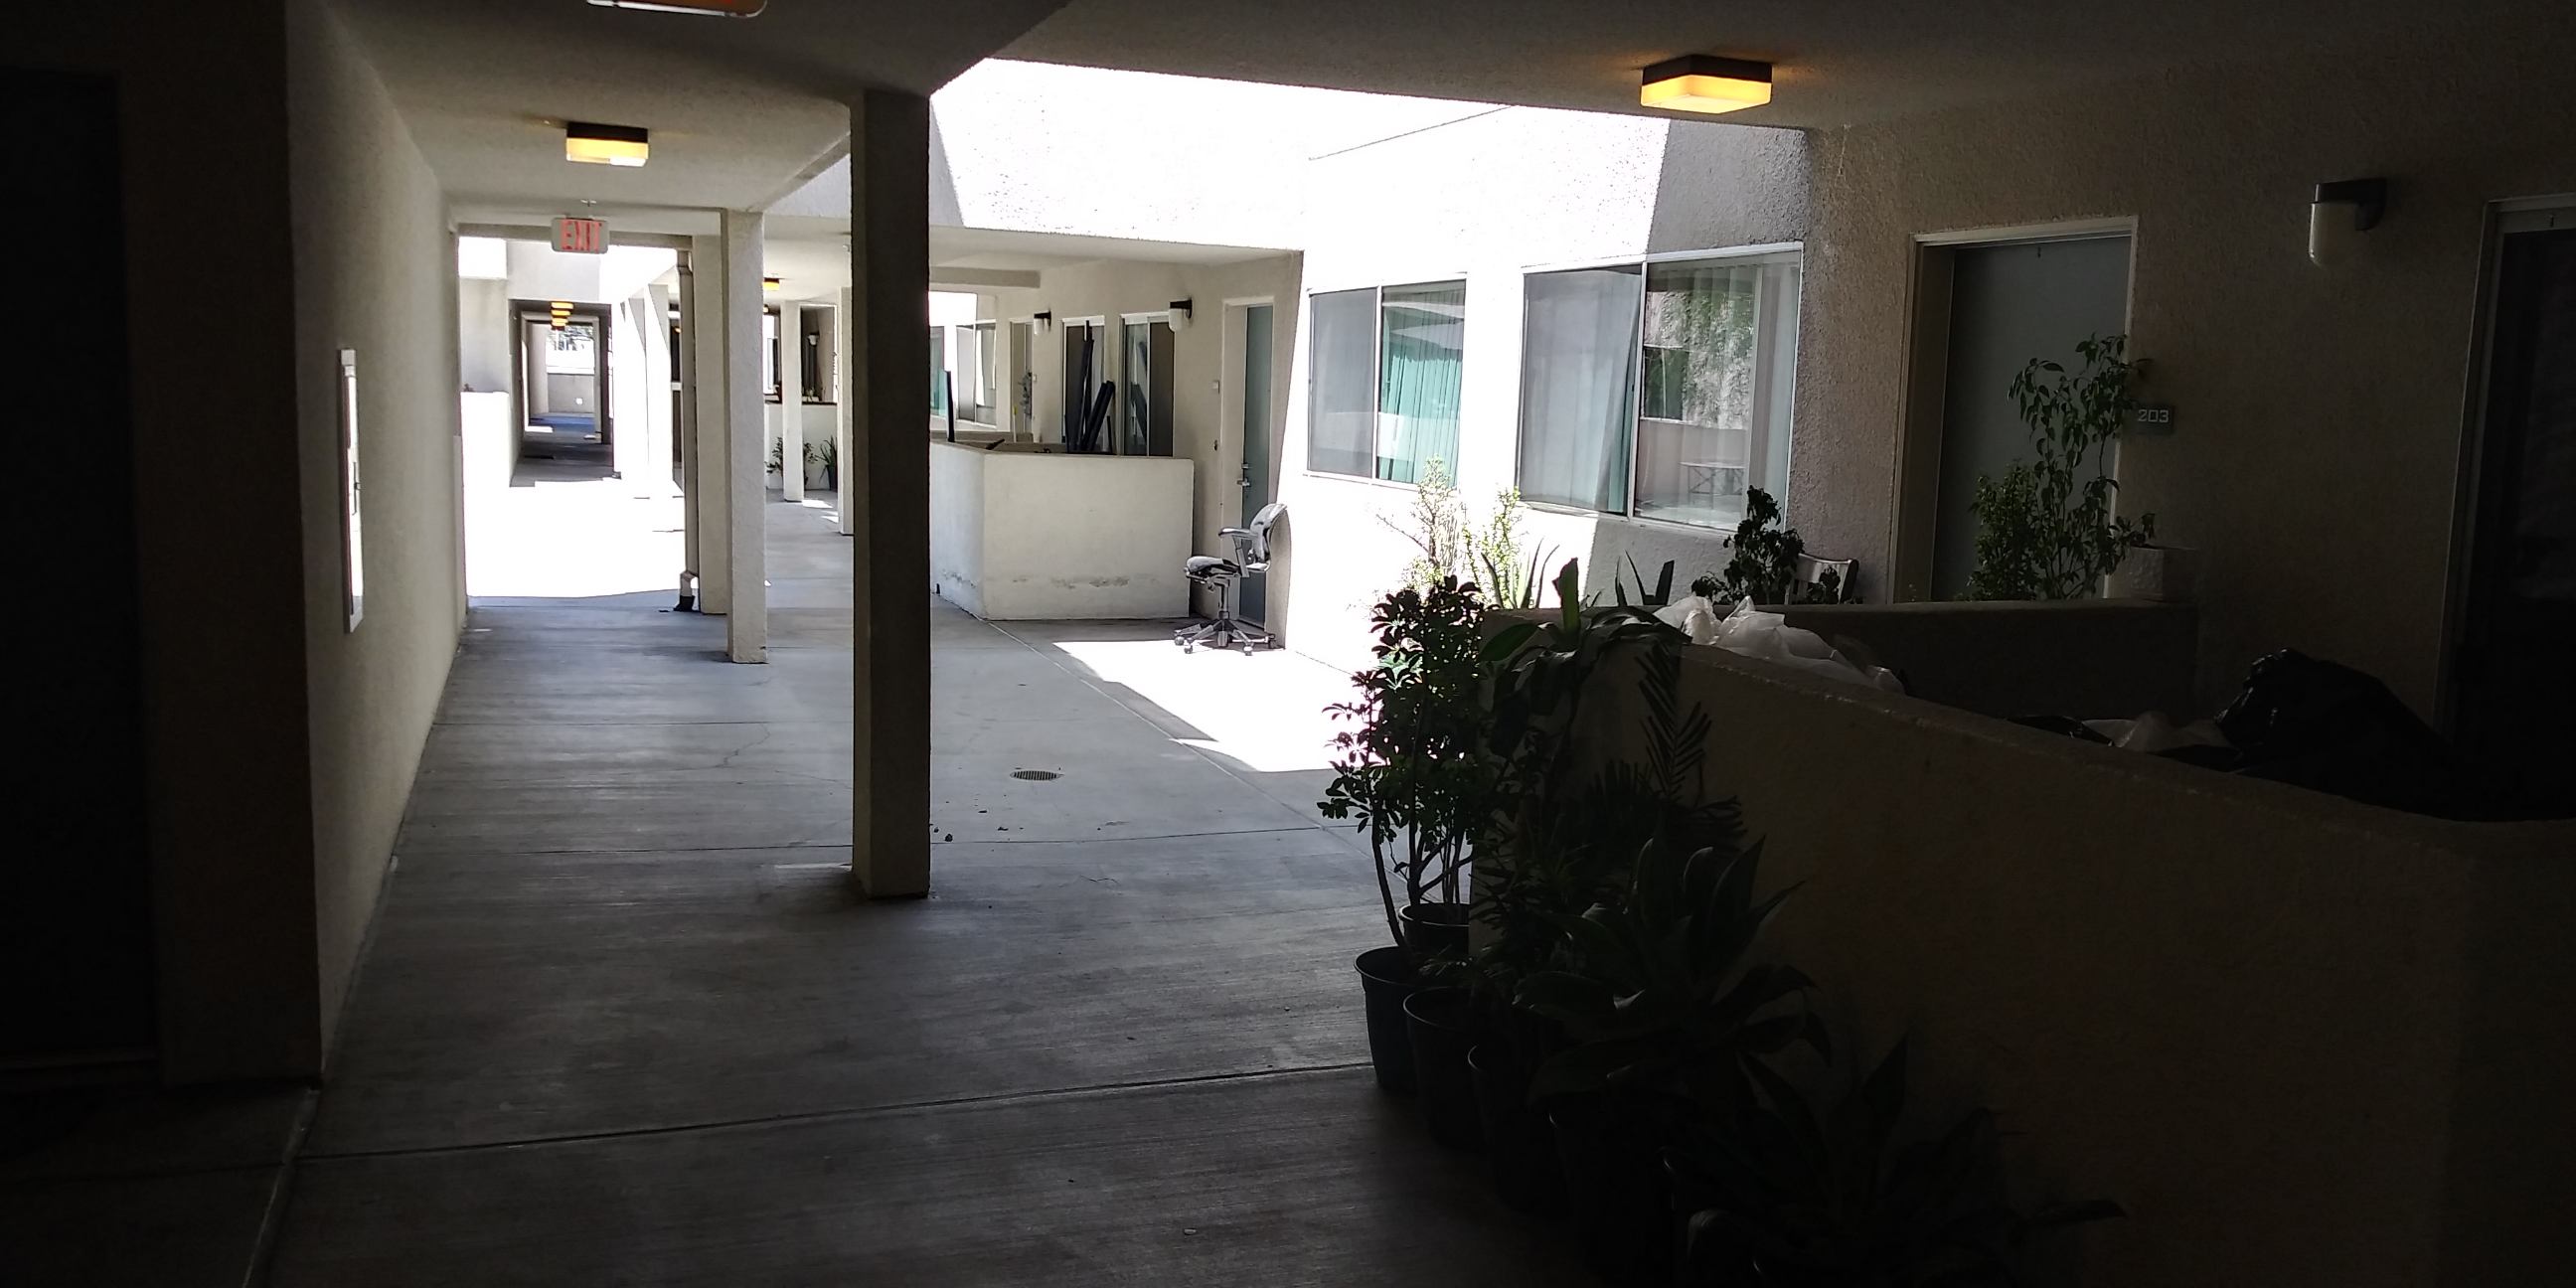 View of an outdoor passageway to units that is semi covered. Units have lounging spaces in front of them that are semi enclosed.